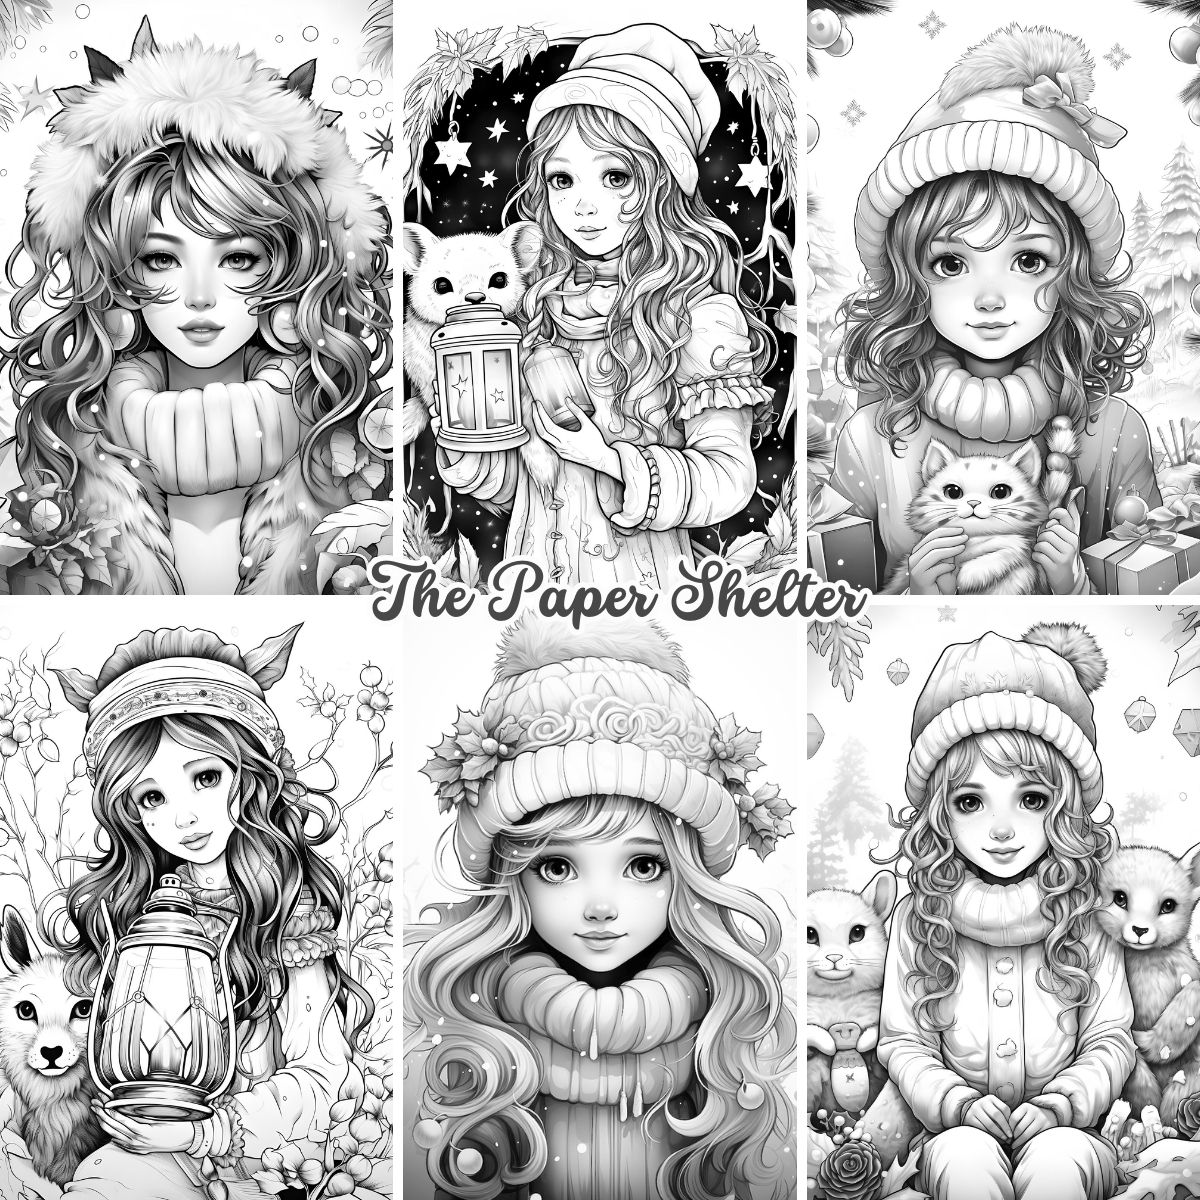 Winter Whimsy - Digital Coloring Book - Click Image to Close